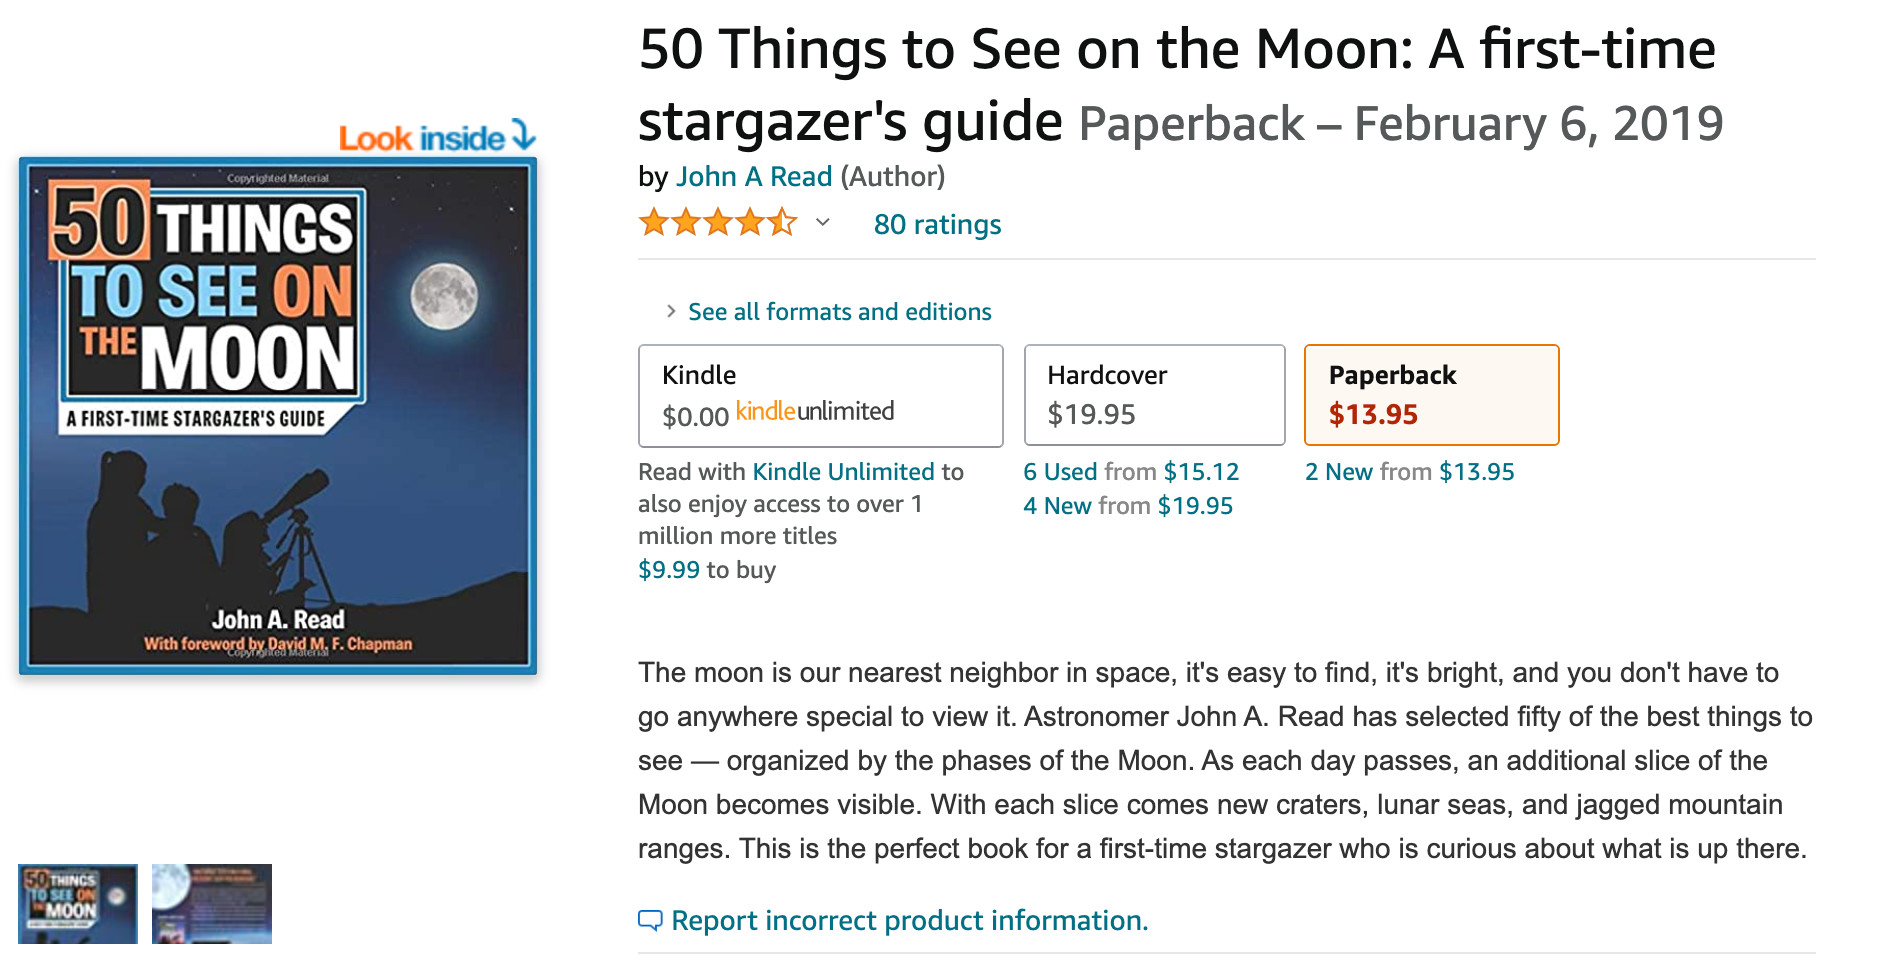 50 Things to See on the Moon- A first-time stargazer's guide.jpg